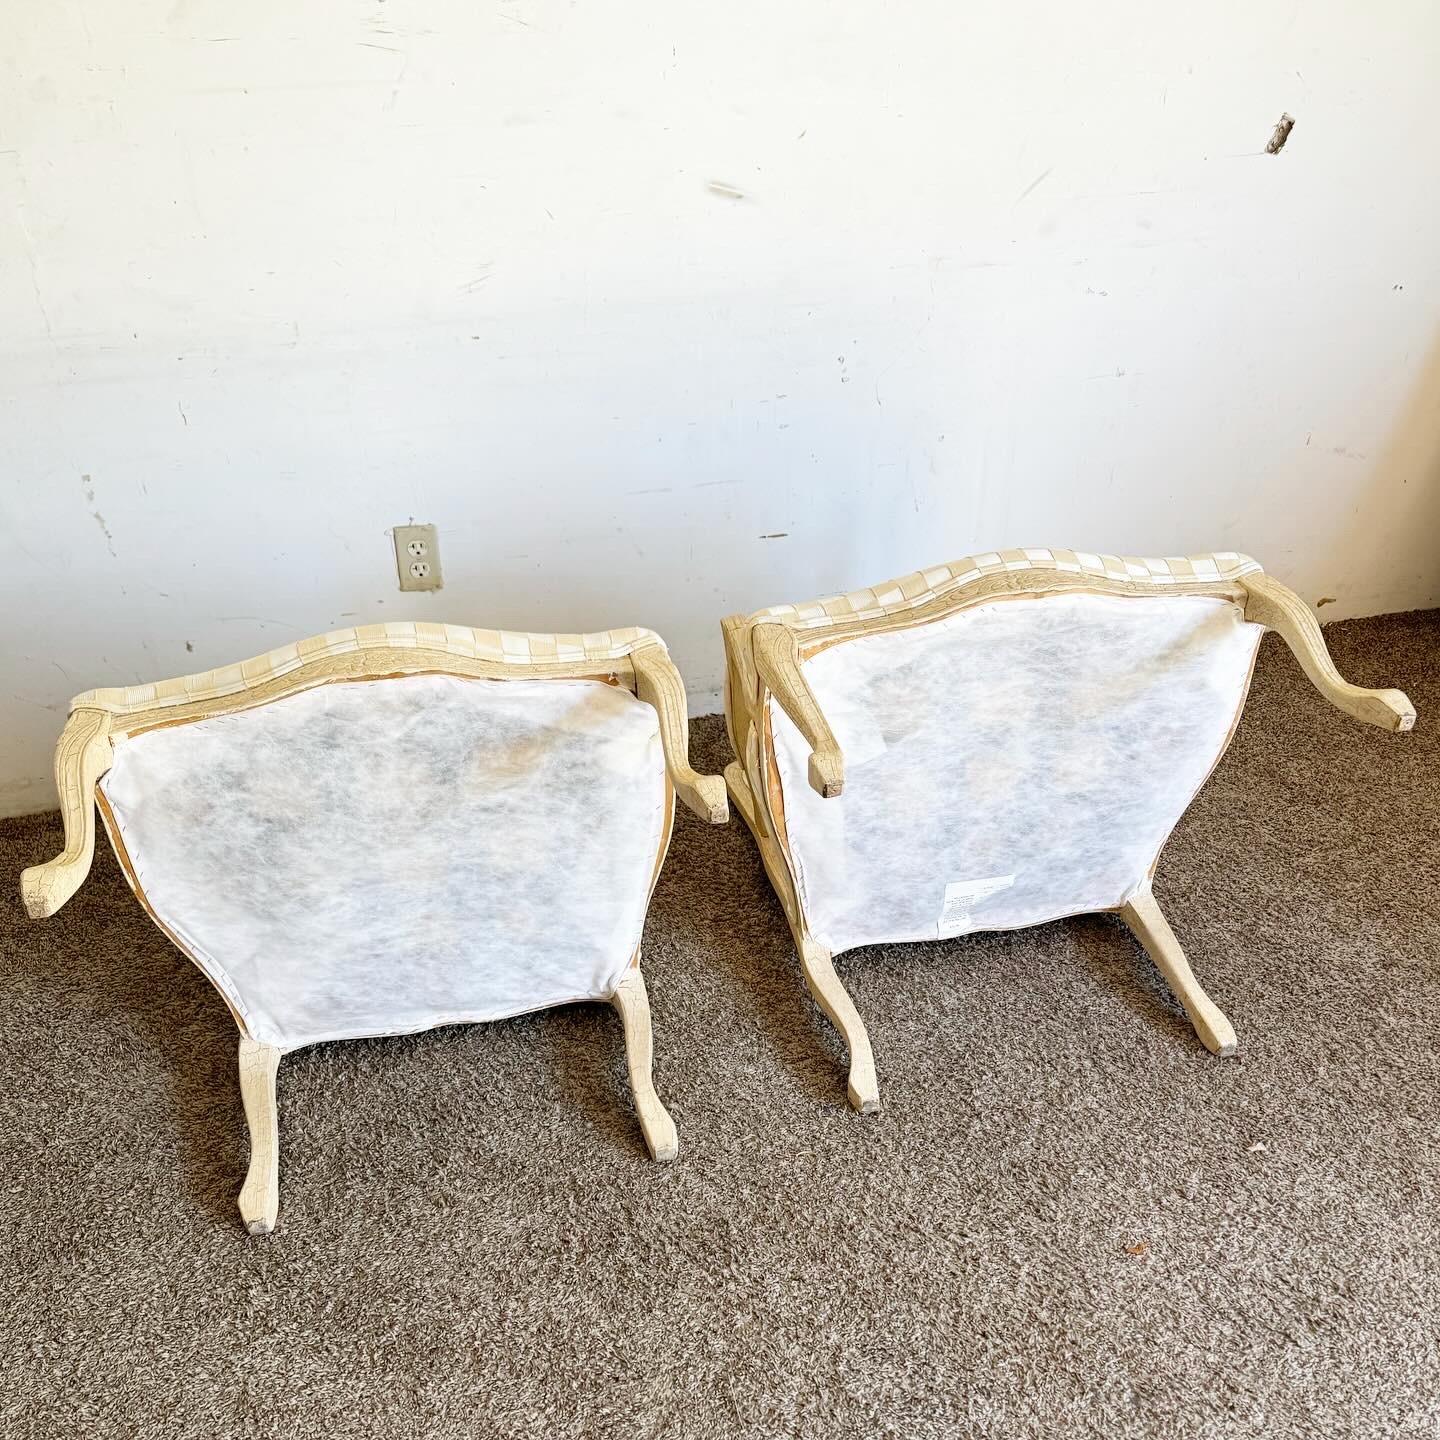 American Vintage Regency Cream Crackled Finish Arm Chairs - a Pair For Sale